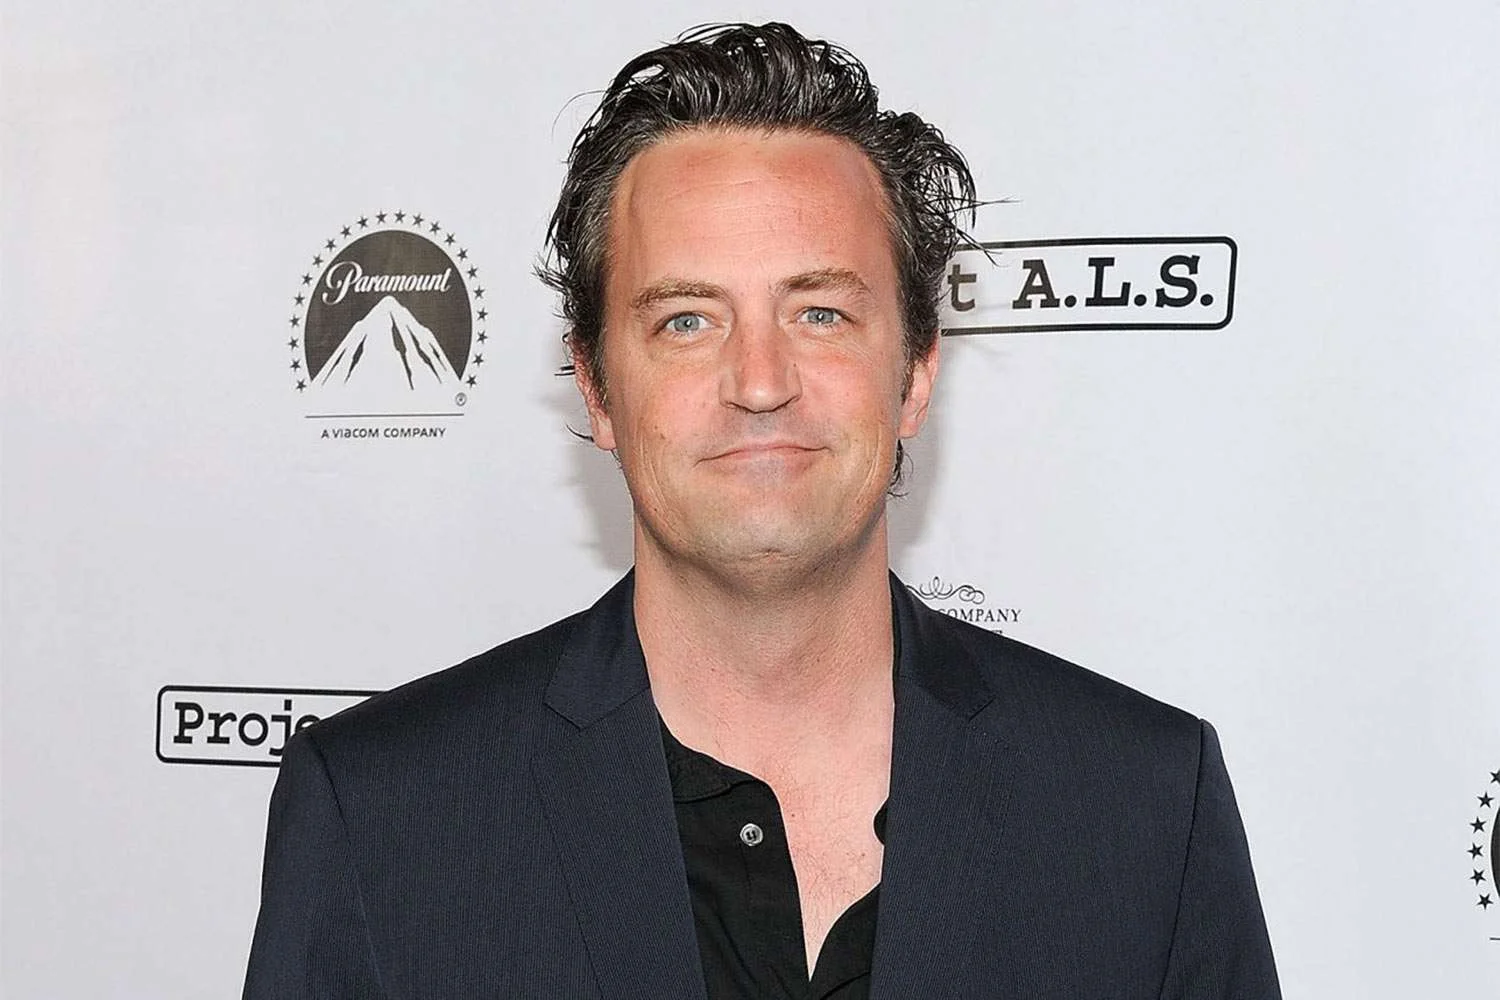 is Matthew perry dead? Read More About Matthew Perry.